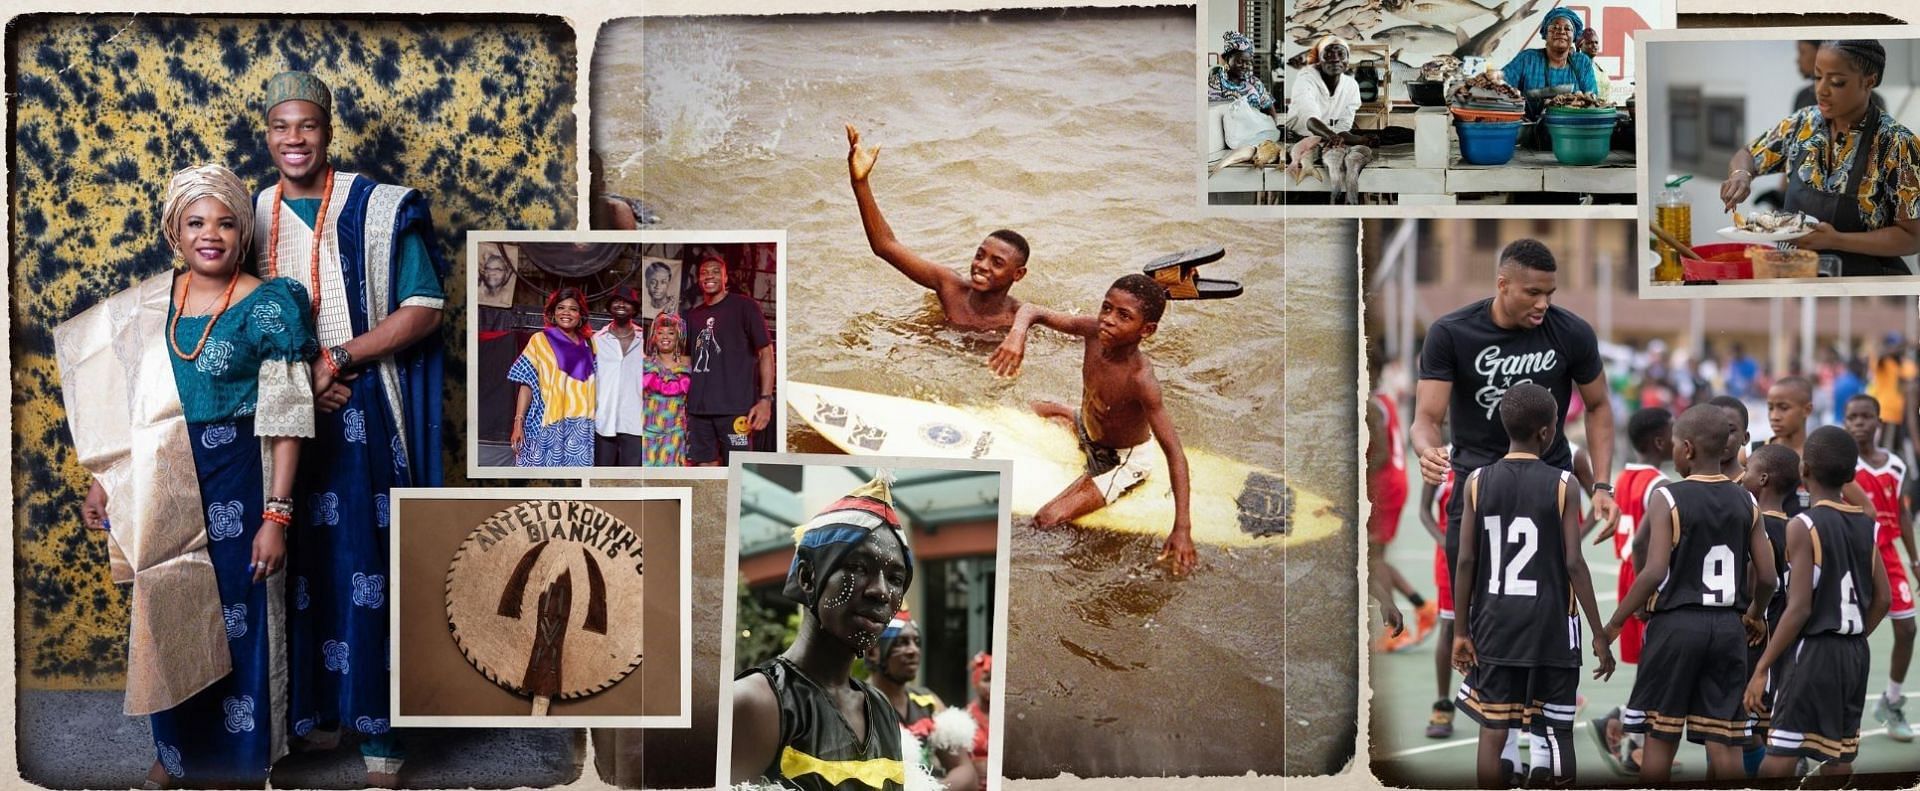 Giannis Antetokounmpo shares on Instagram a collage of photos from his Nigeria trip